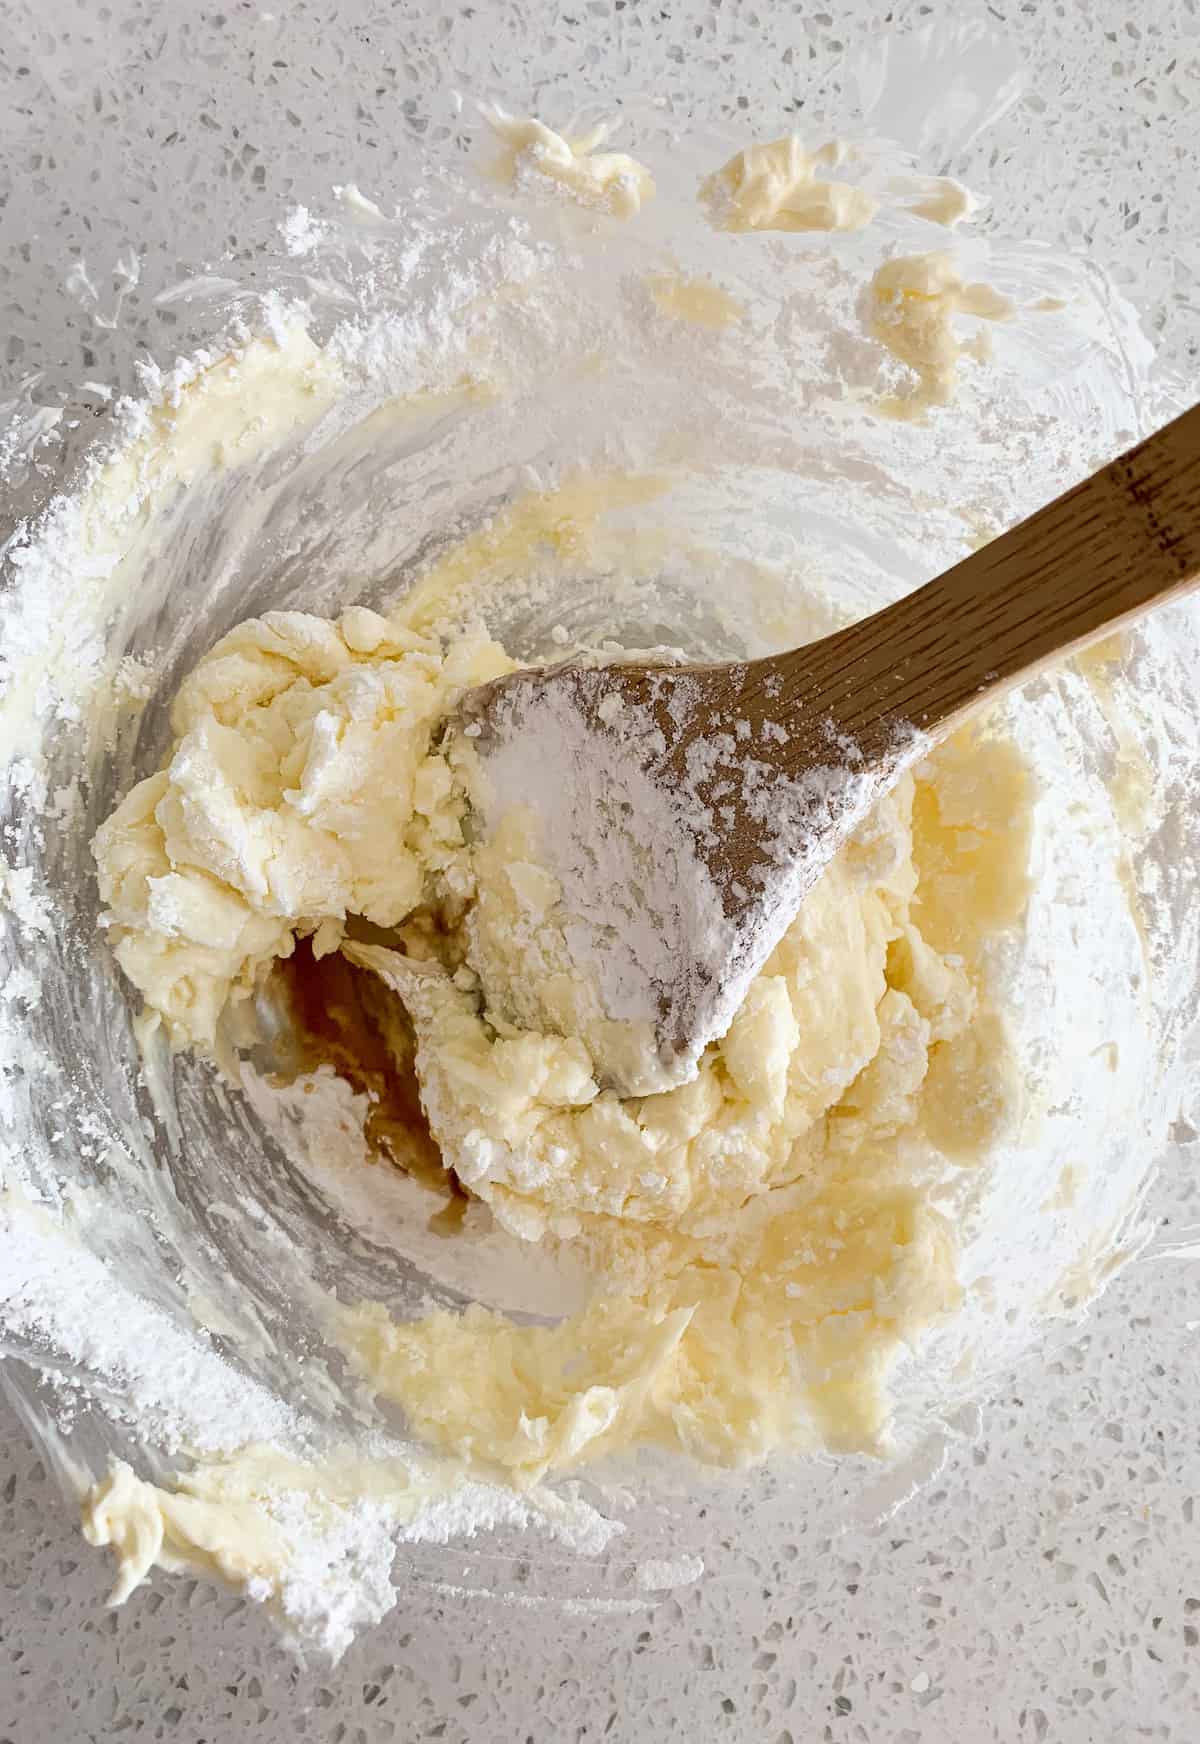 Adding powdered sugar to cream cheese and butter